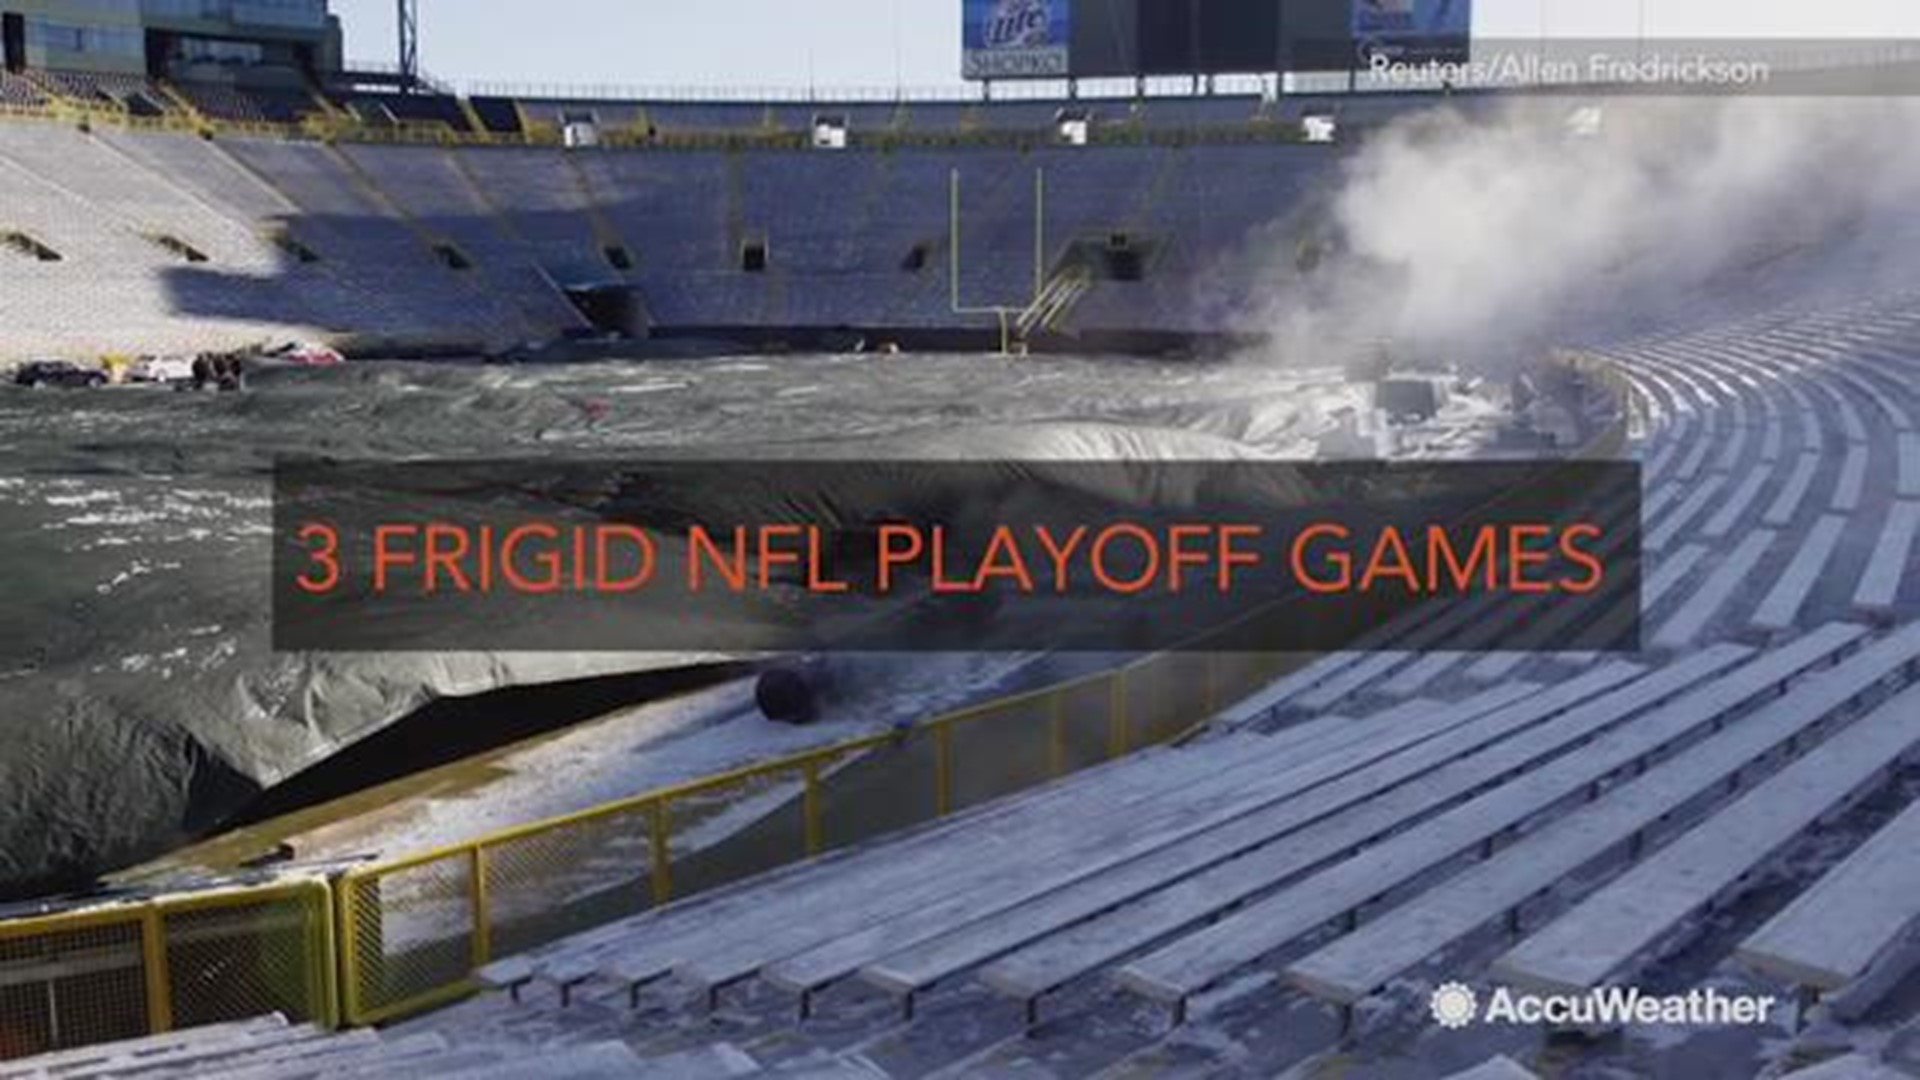 While the Ice Bowl in 1967 is perhaps the most famous cold weather NFL playoff game, since the turn of the century there have been several other notable games played in frigid conditions in recent years.